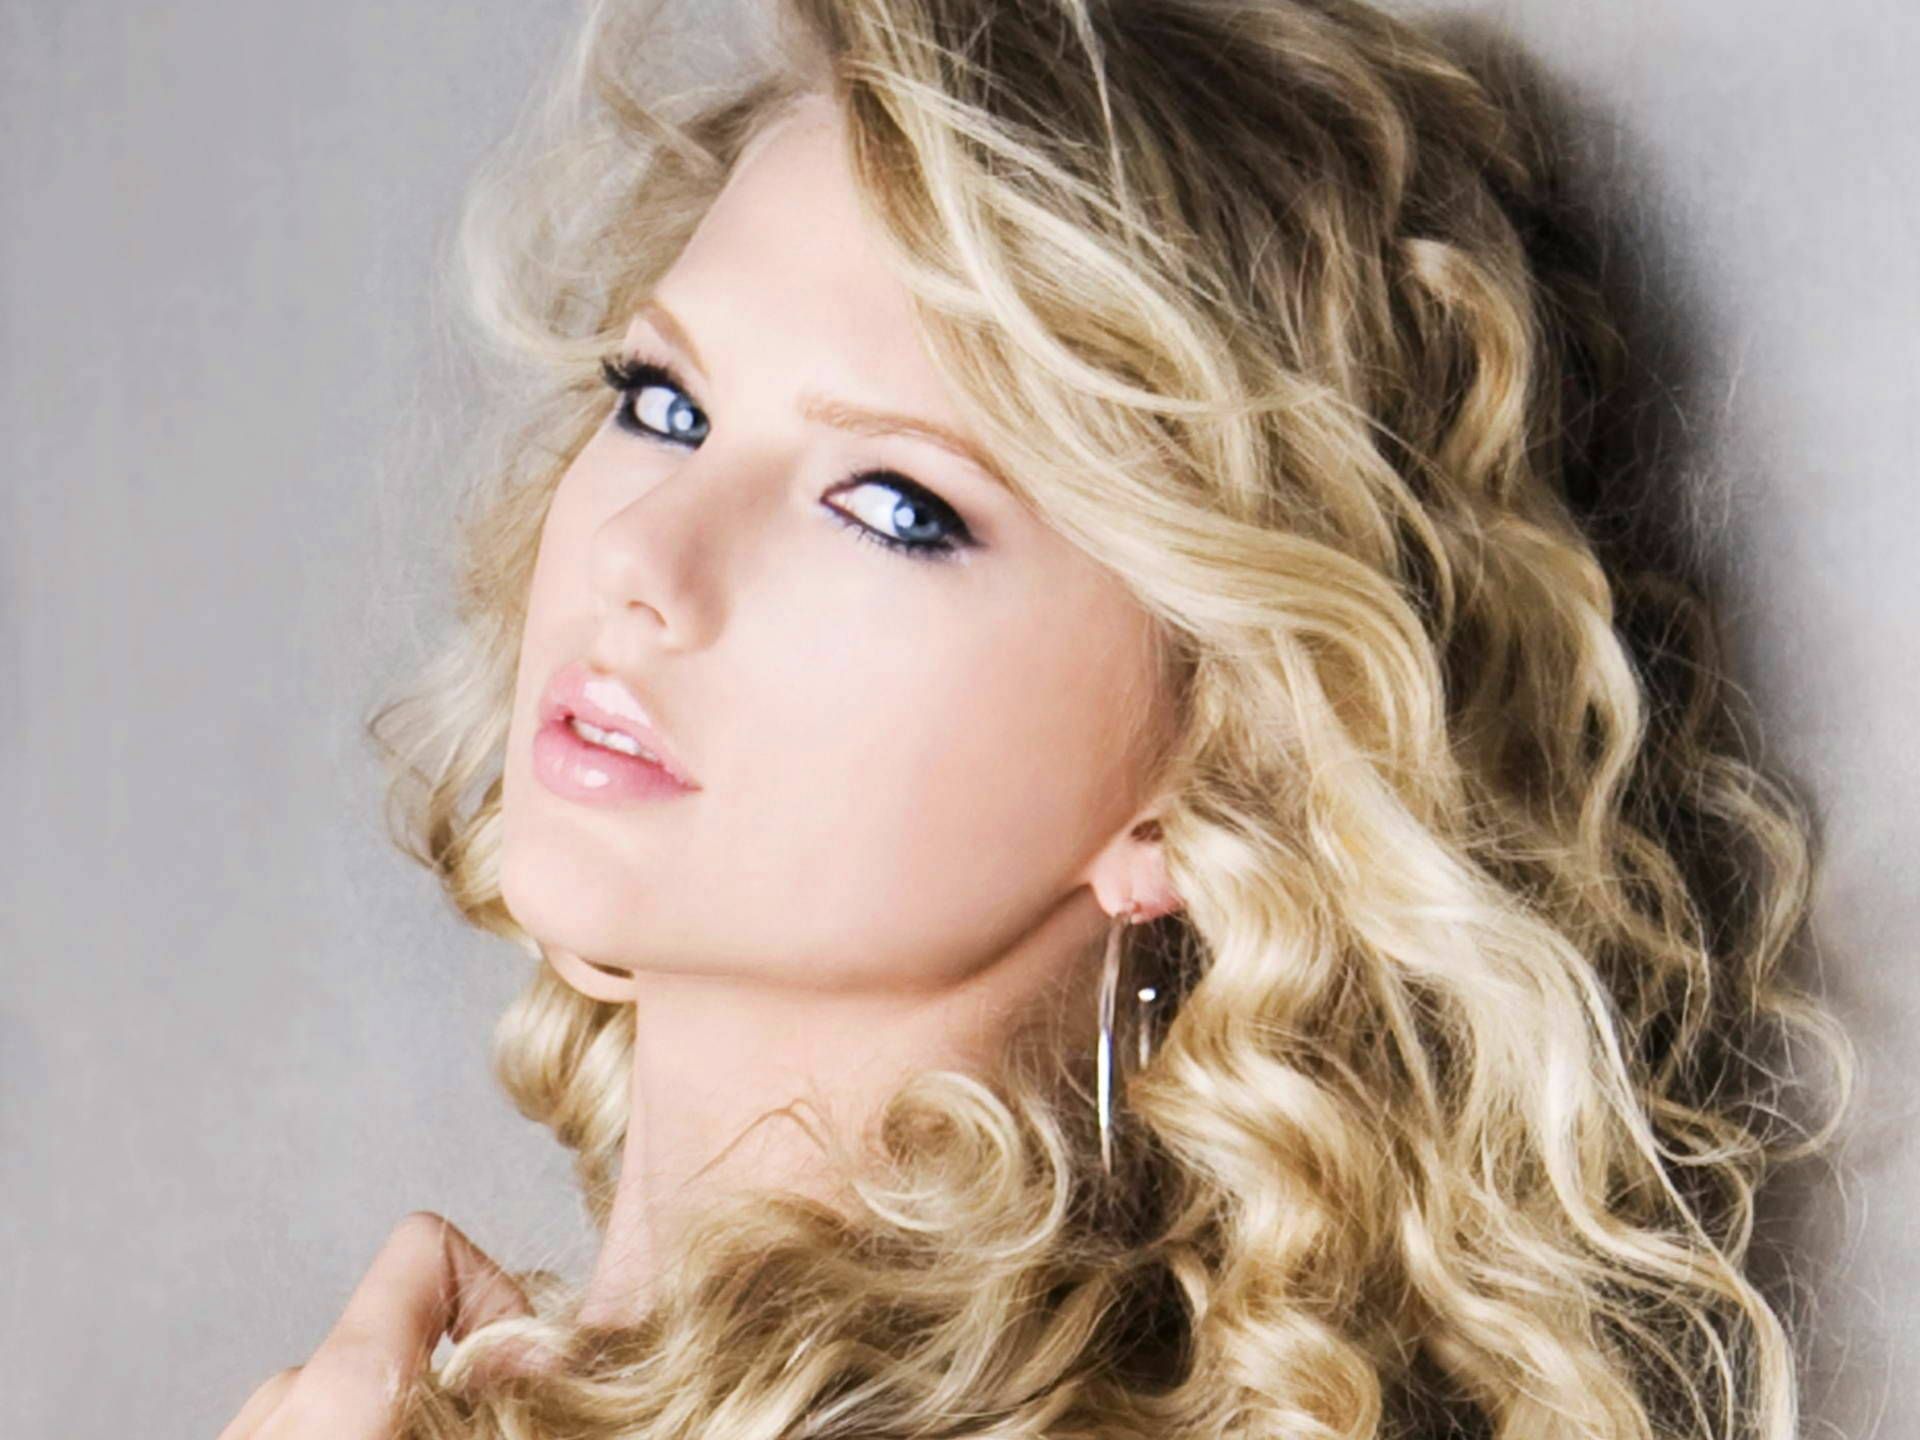 taylor-swift-hot-wallpapers-1